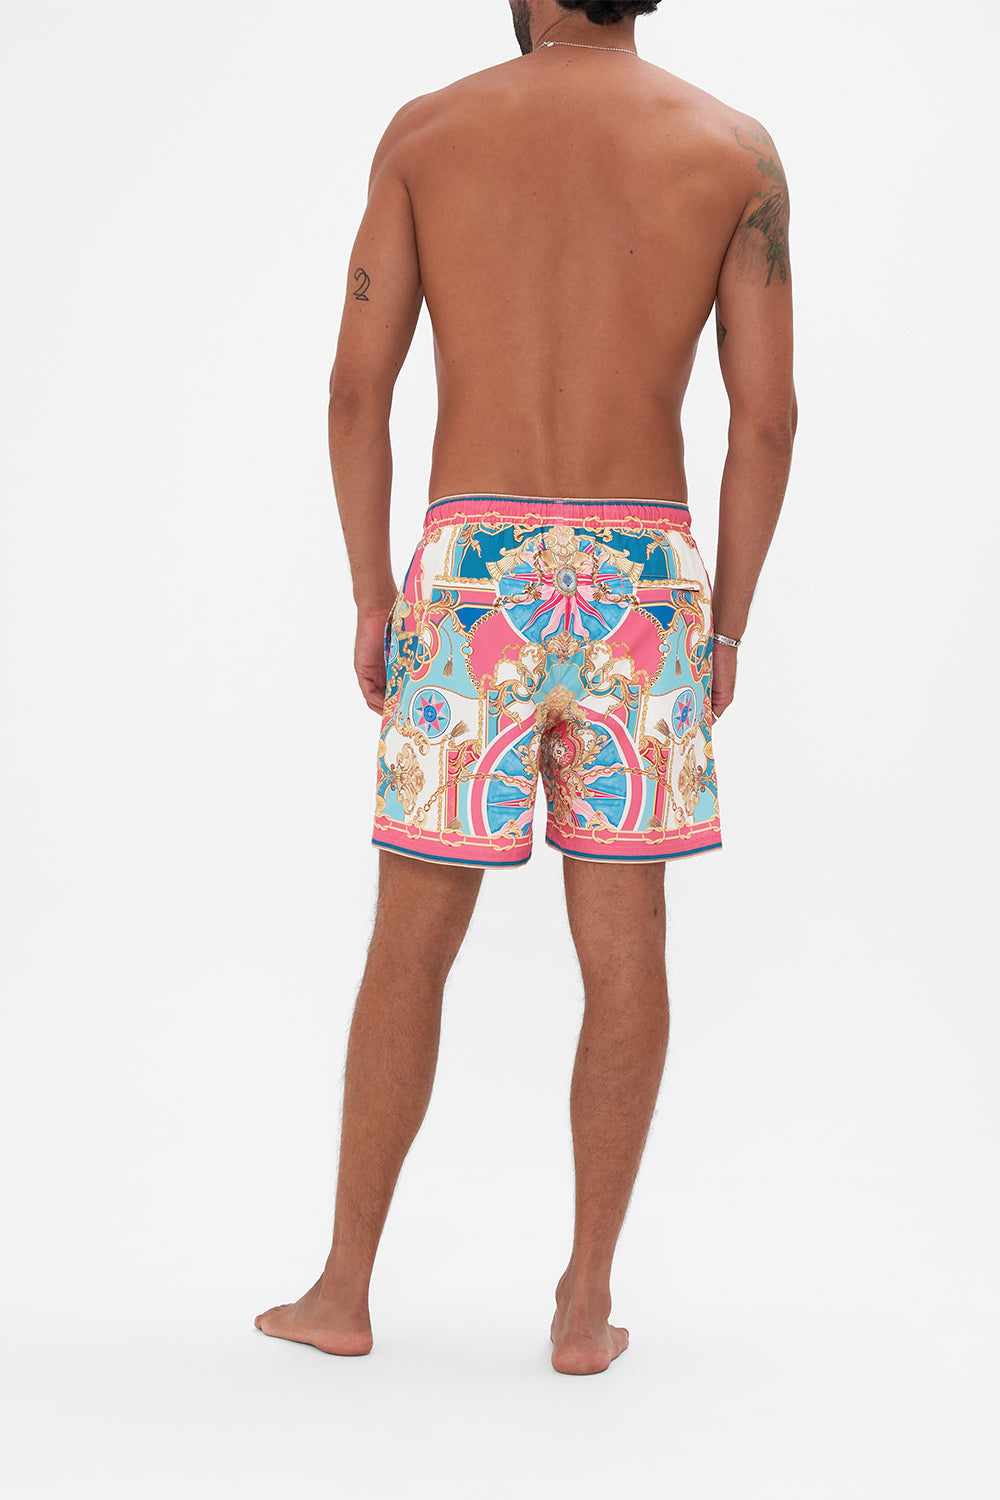 Back view of model wearing Hotel Franks by CAMILLA designer boardshorts in Sail Away With Me print 